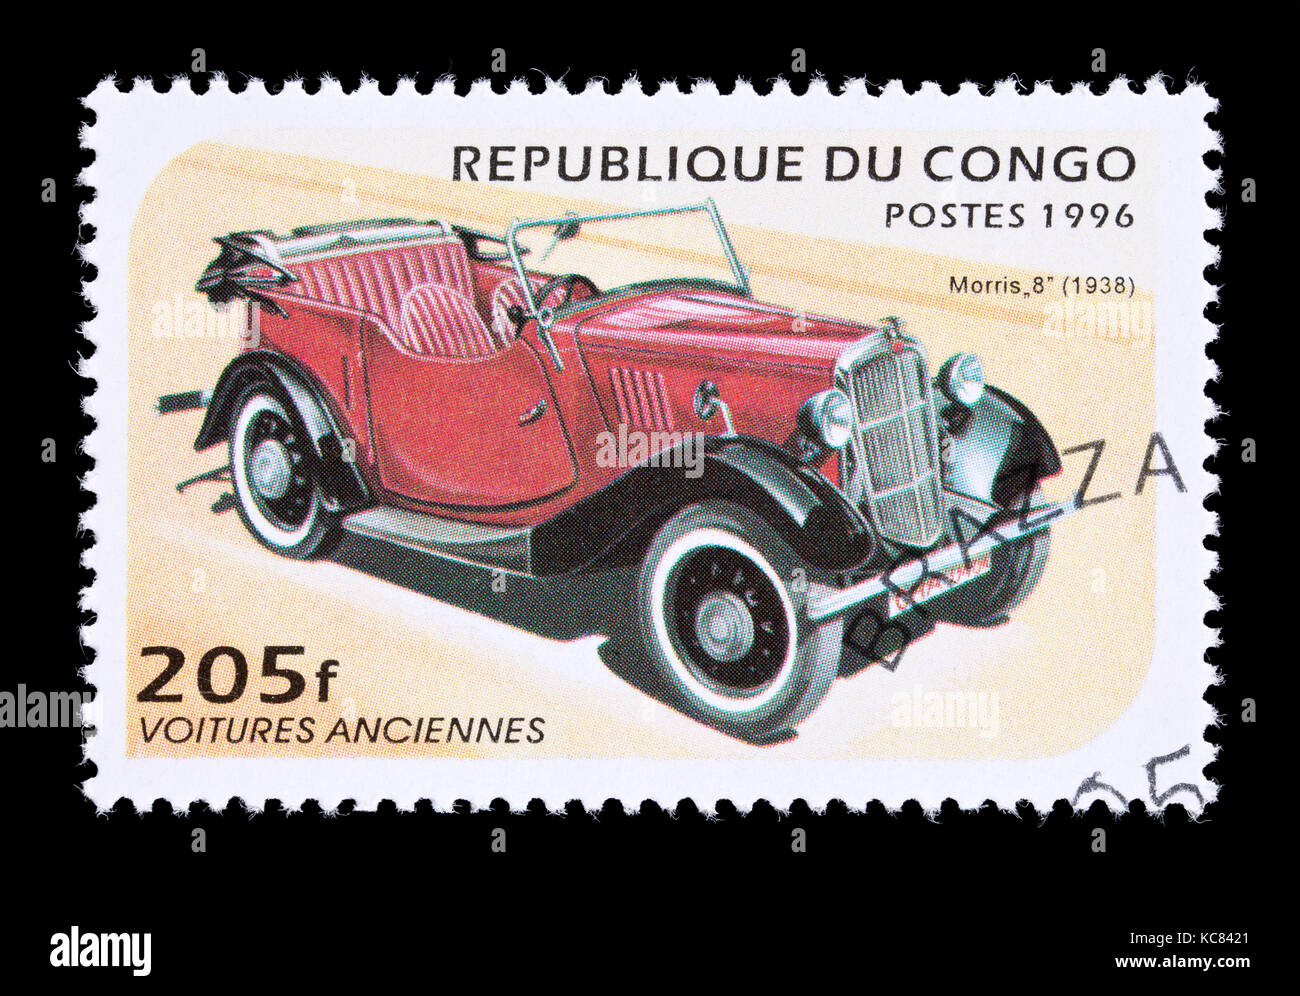 Postage stamp from the People's Republic of Congo depicting 1936 Morris 8  classic automobile Stock Photo